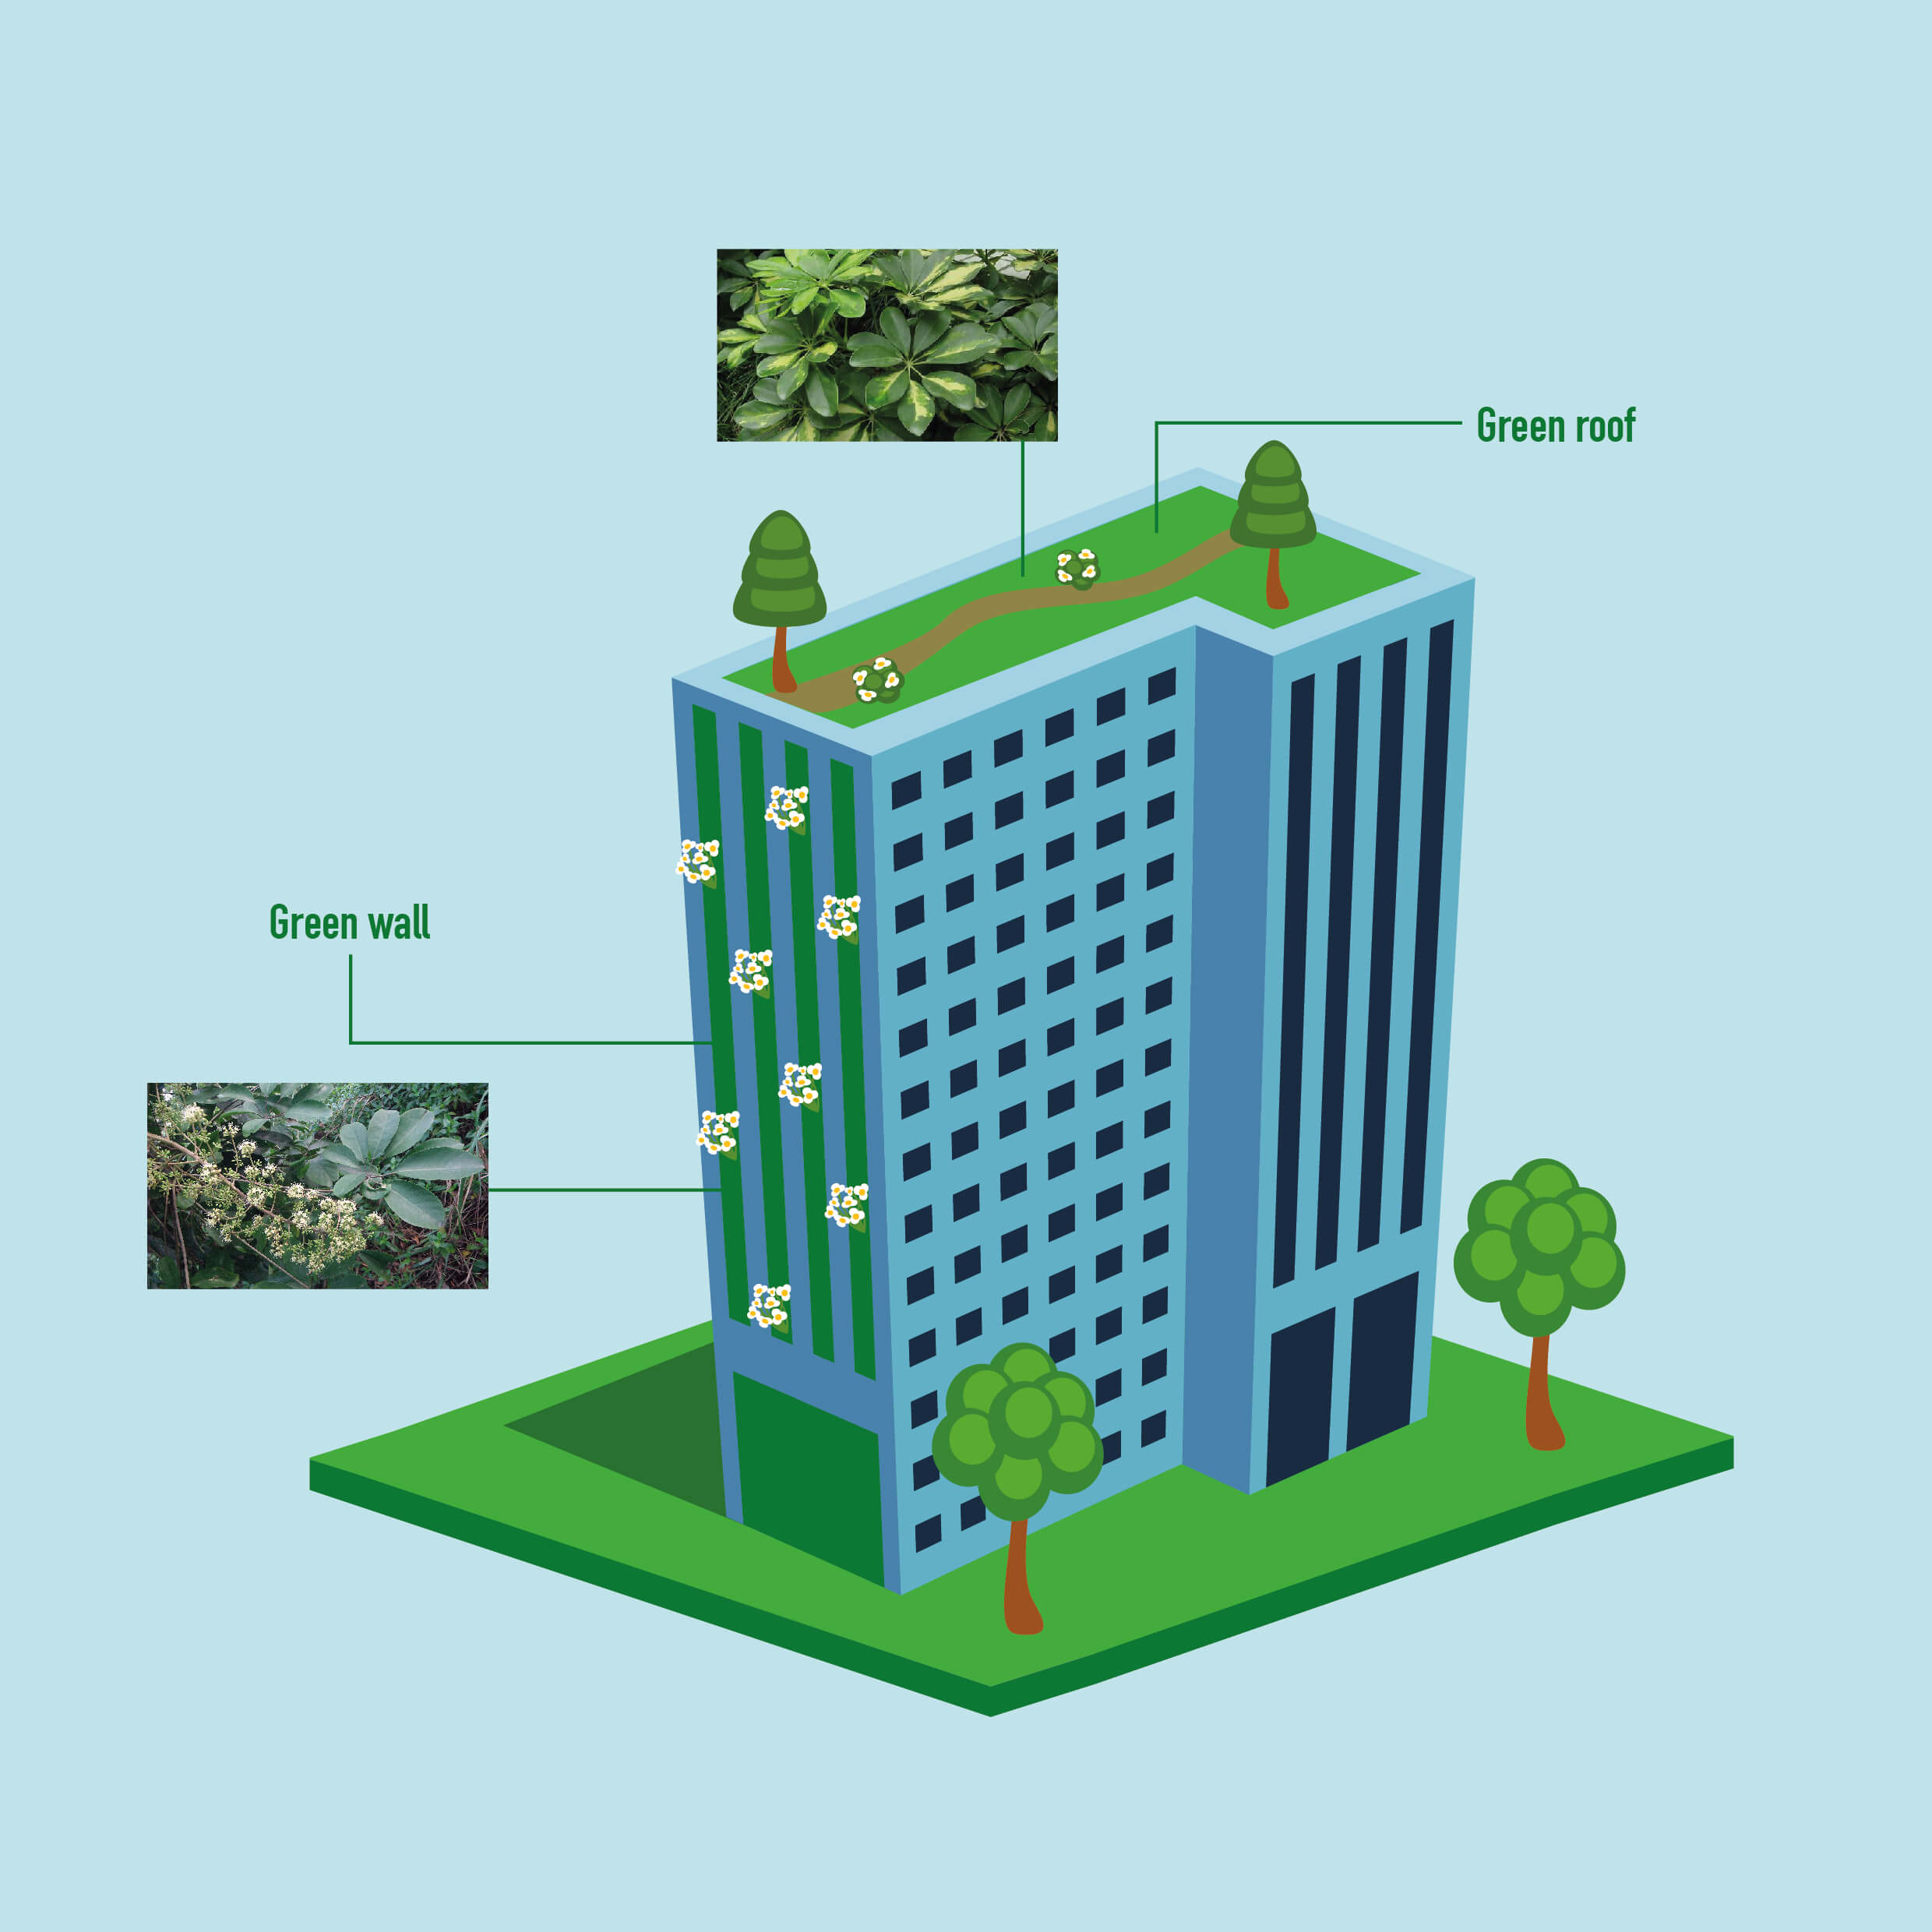 Plants' species need to be chosen carefully in accordance with the microenvironment, said Crystal Li. Boaters ferns and Schefflera heptaphylla are commonly selected for outdoor skyrise garden due to their resistance to difficult conditions, namely poor air quality and insufficient sunlight, she added.